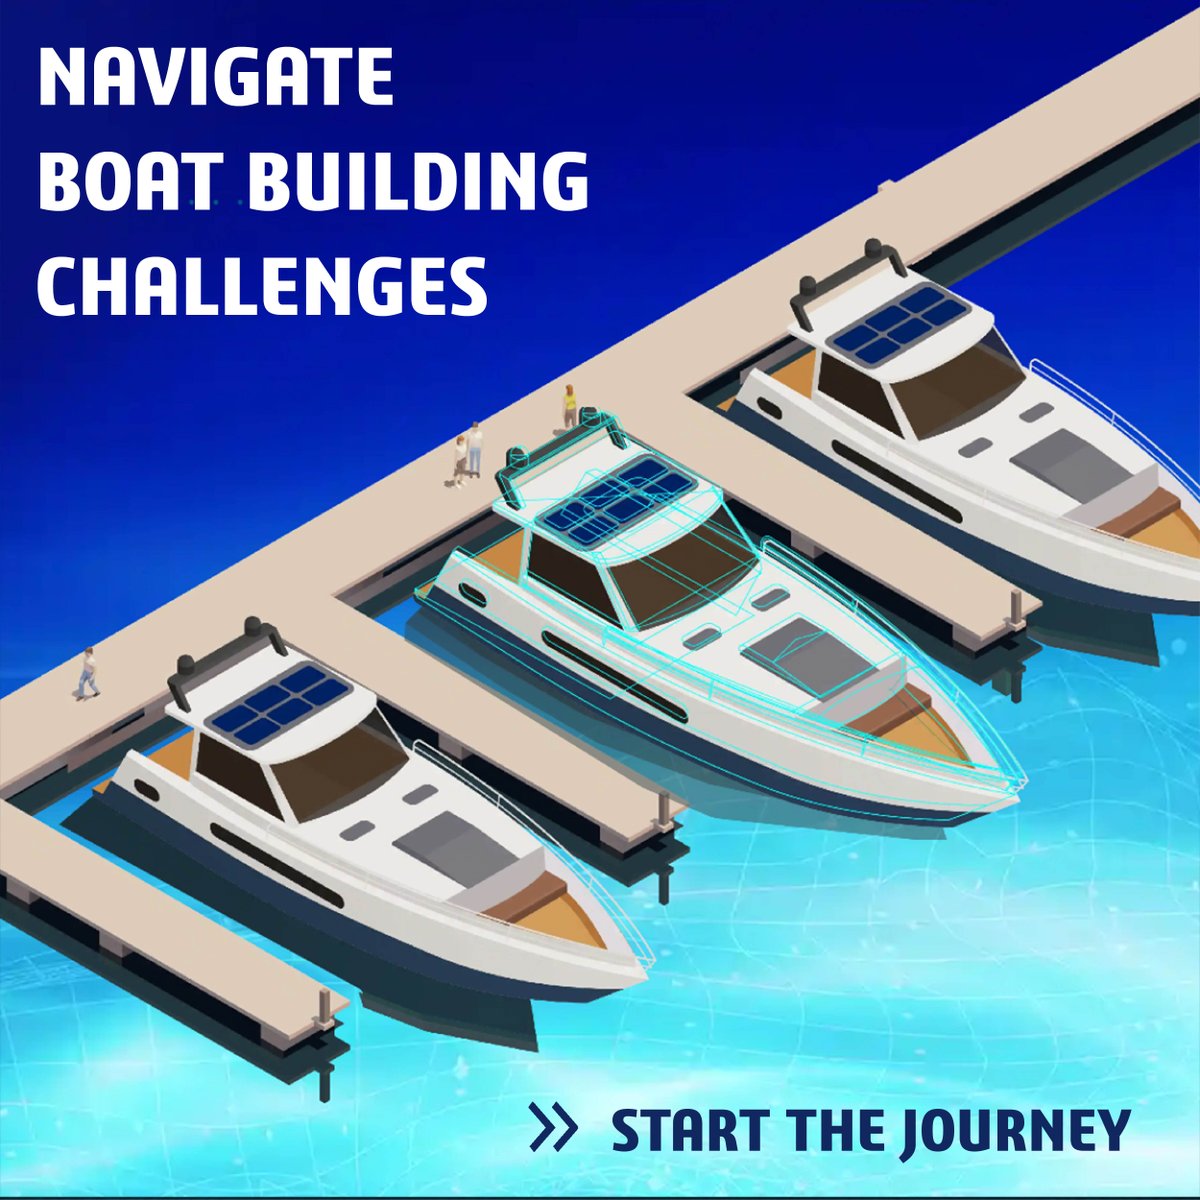 How do boat builders conquer today's challenges?  
Explore cutting-edge solutions and collaborative benefits on our platform that unlocks success.

Navigate boat building challenges >> go.3ds.com/HU6

#boatbuilding #yachtingindustry #dassaultsystèmes